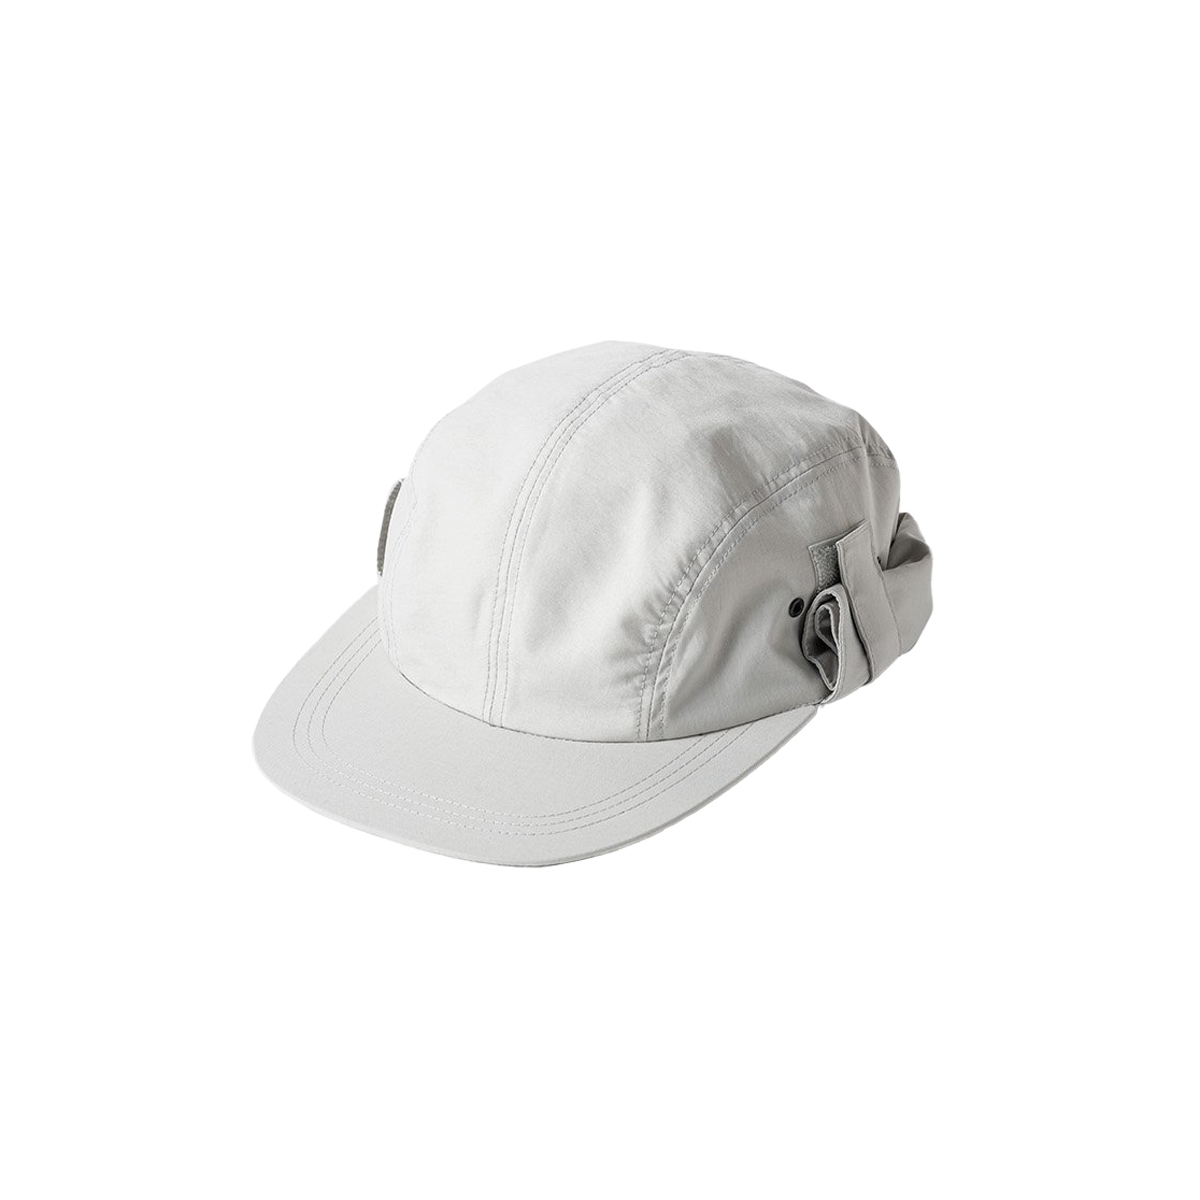 TIGHTBOOTH - Sunshade Camp Cap - 3 Colors